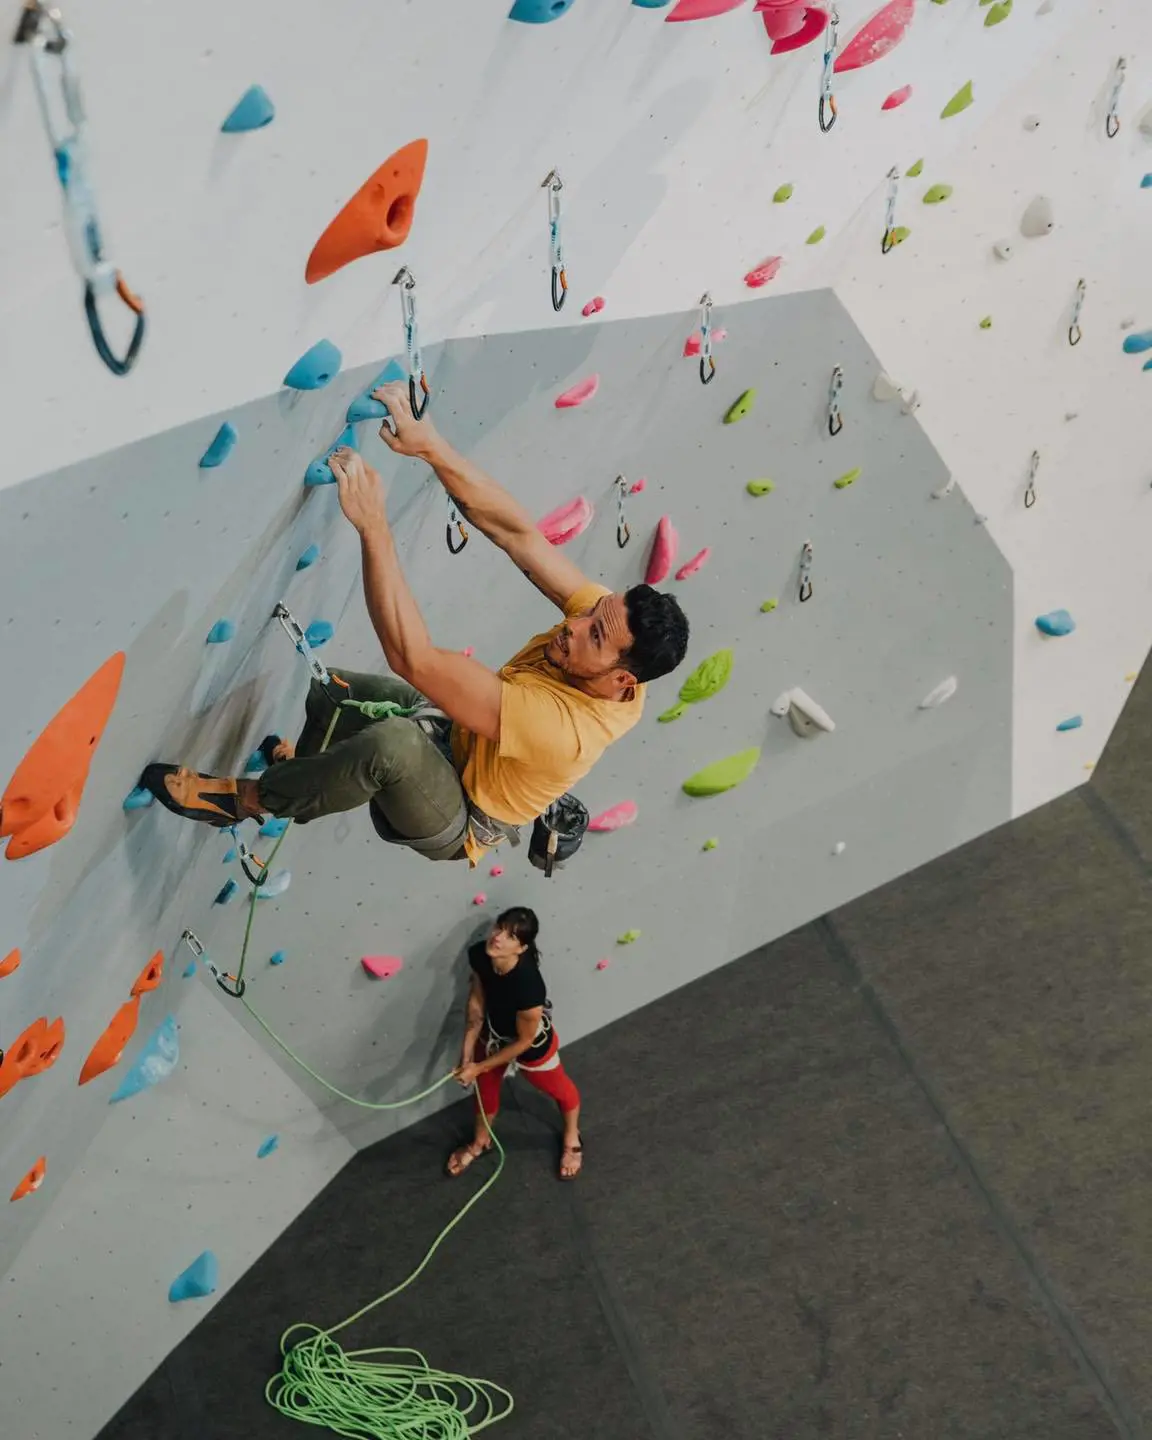 Rock climbing is another thrilling date experience a couple can experience through this date idea.